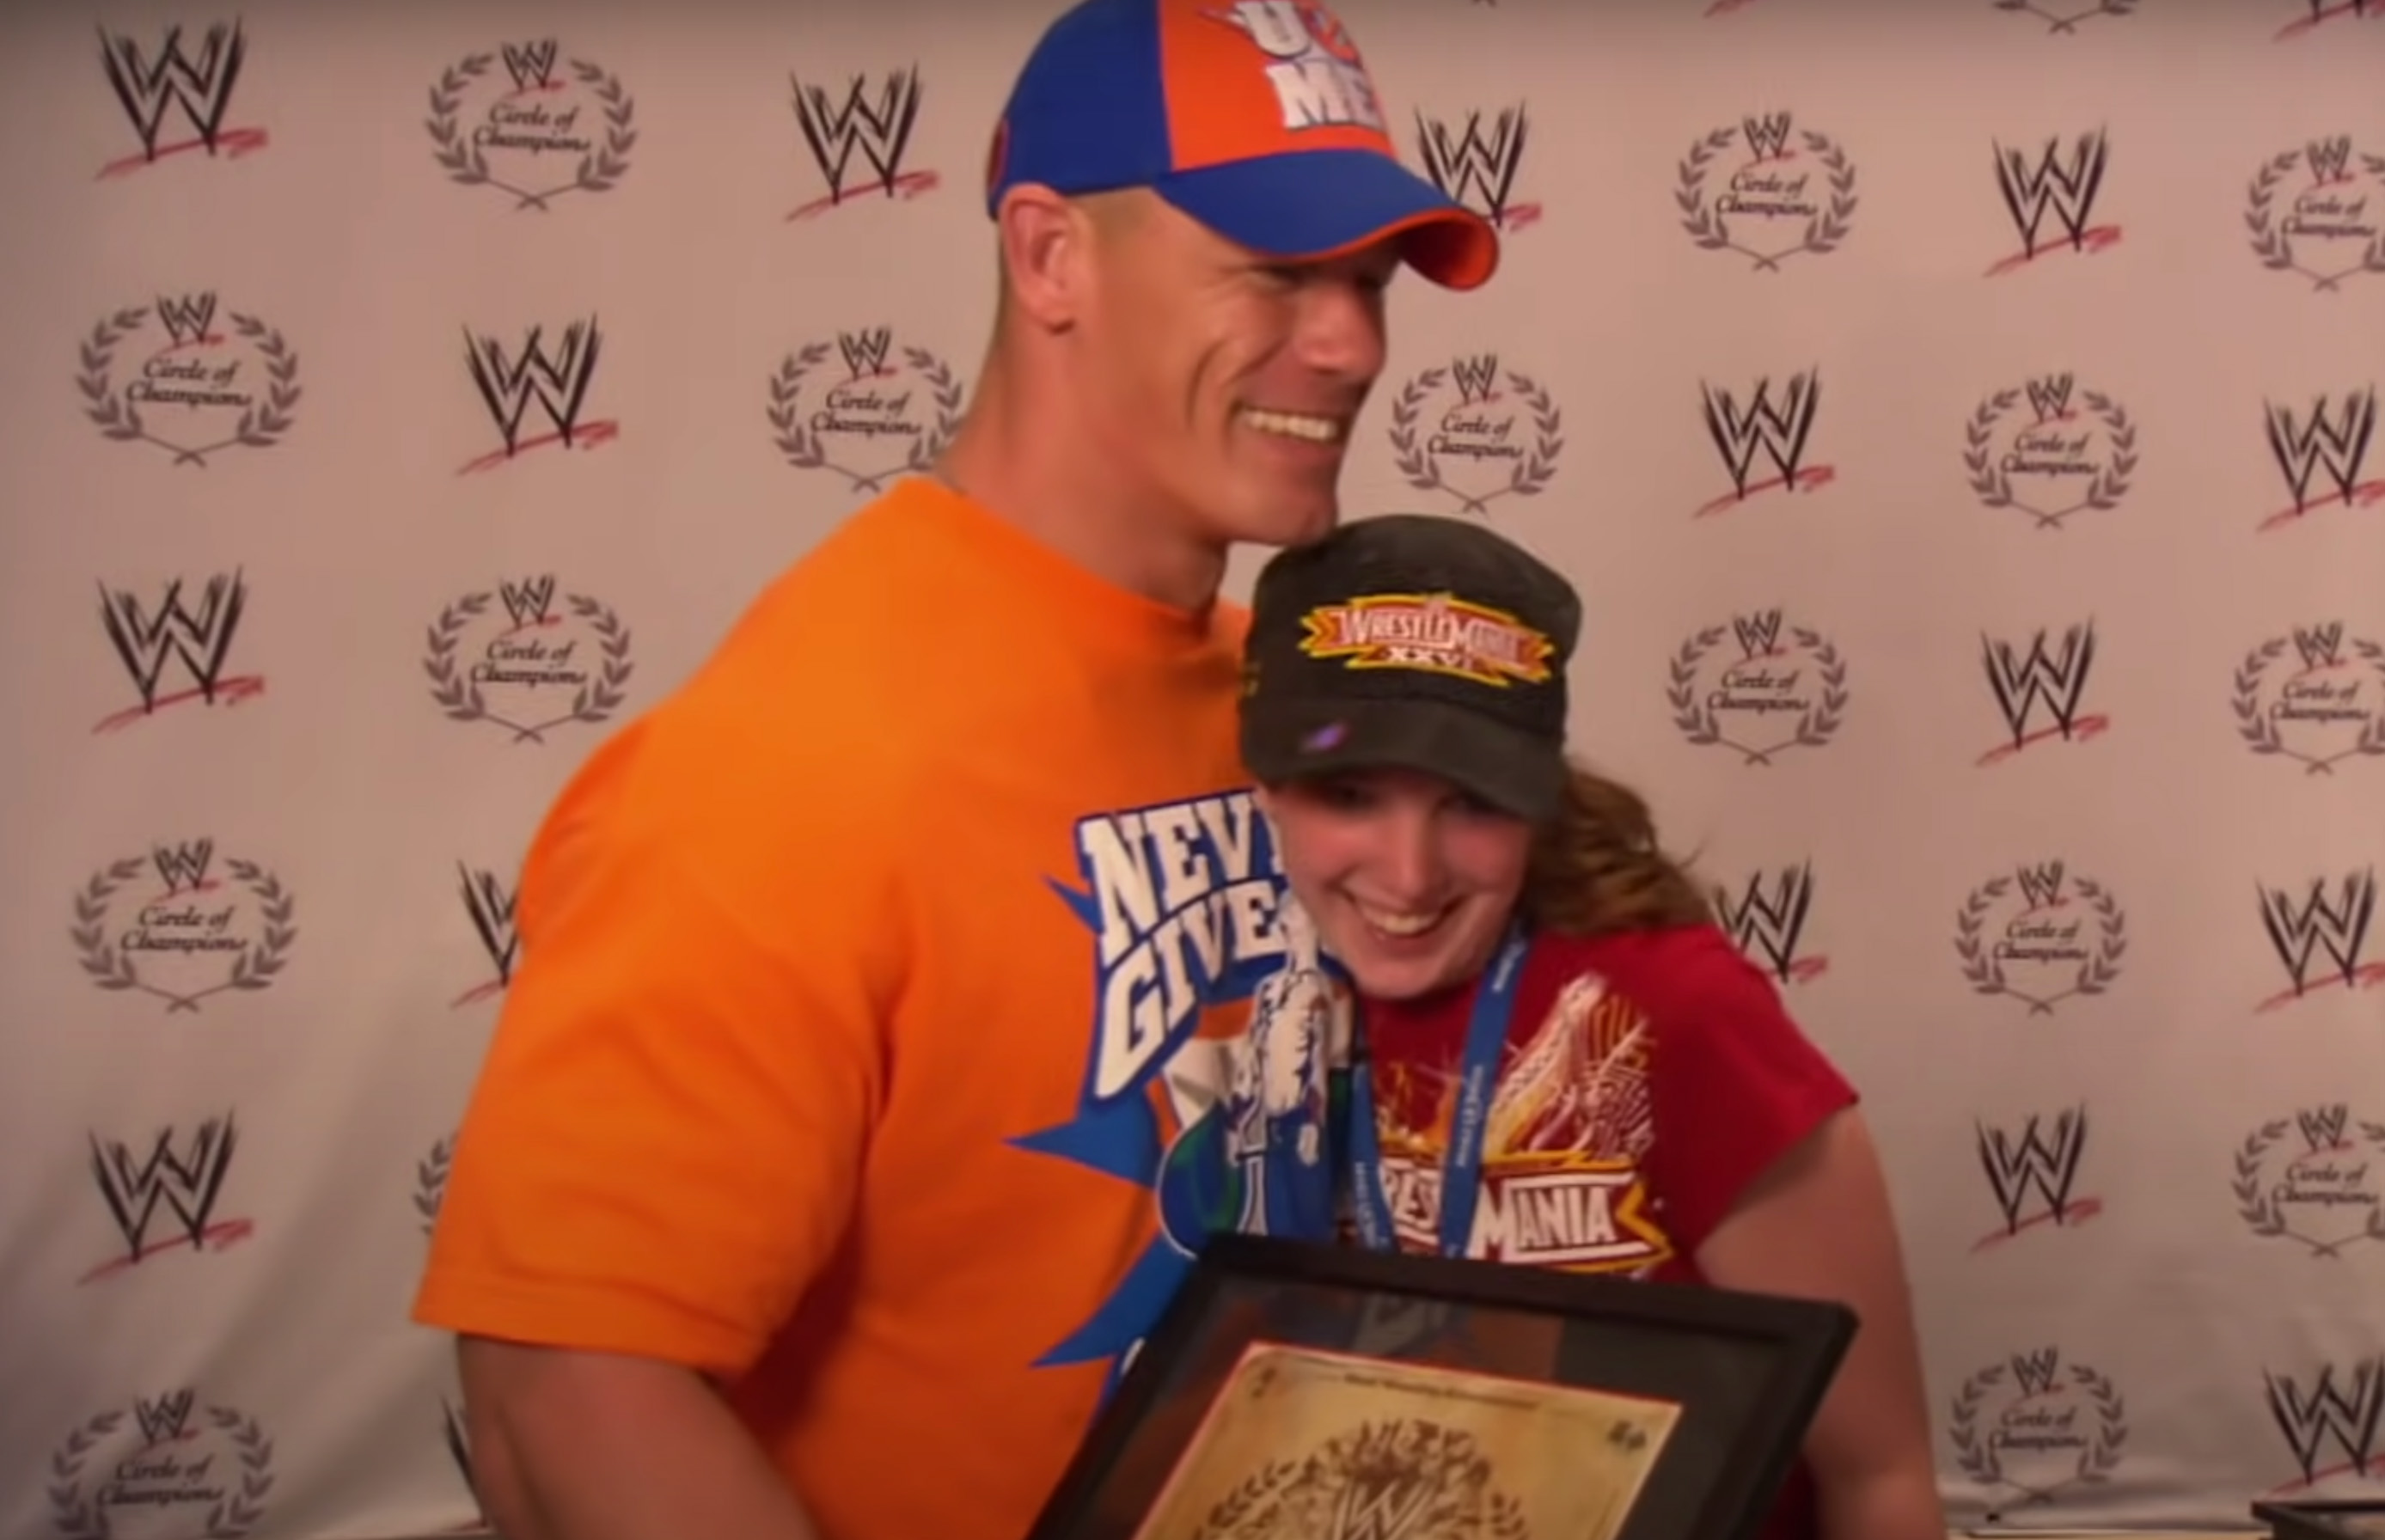 Wrestler John Cena Sets New Record For Most Make-A-Wish Foundation Dreams Fulfilled